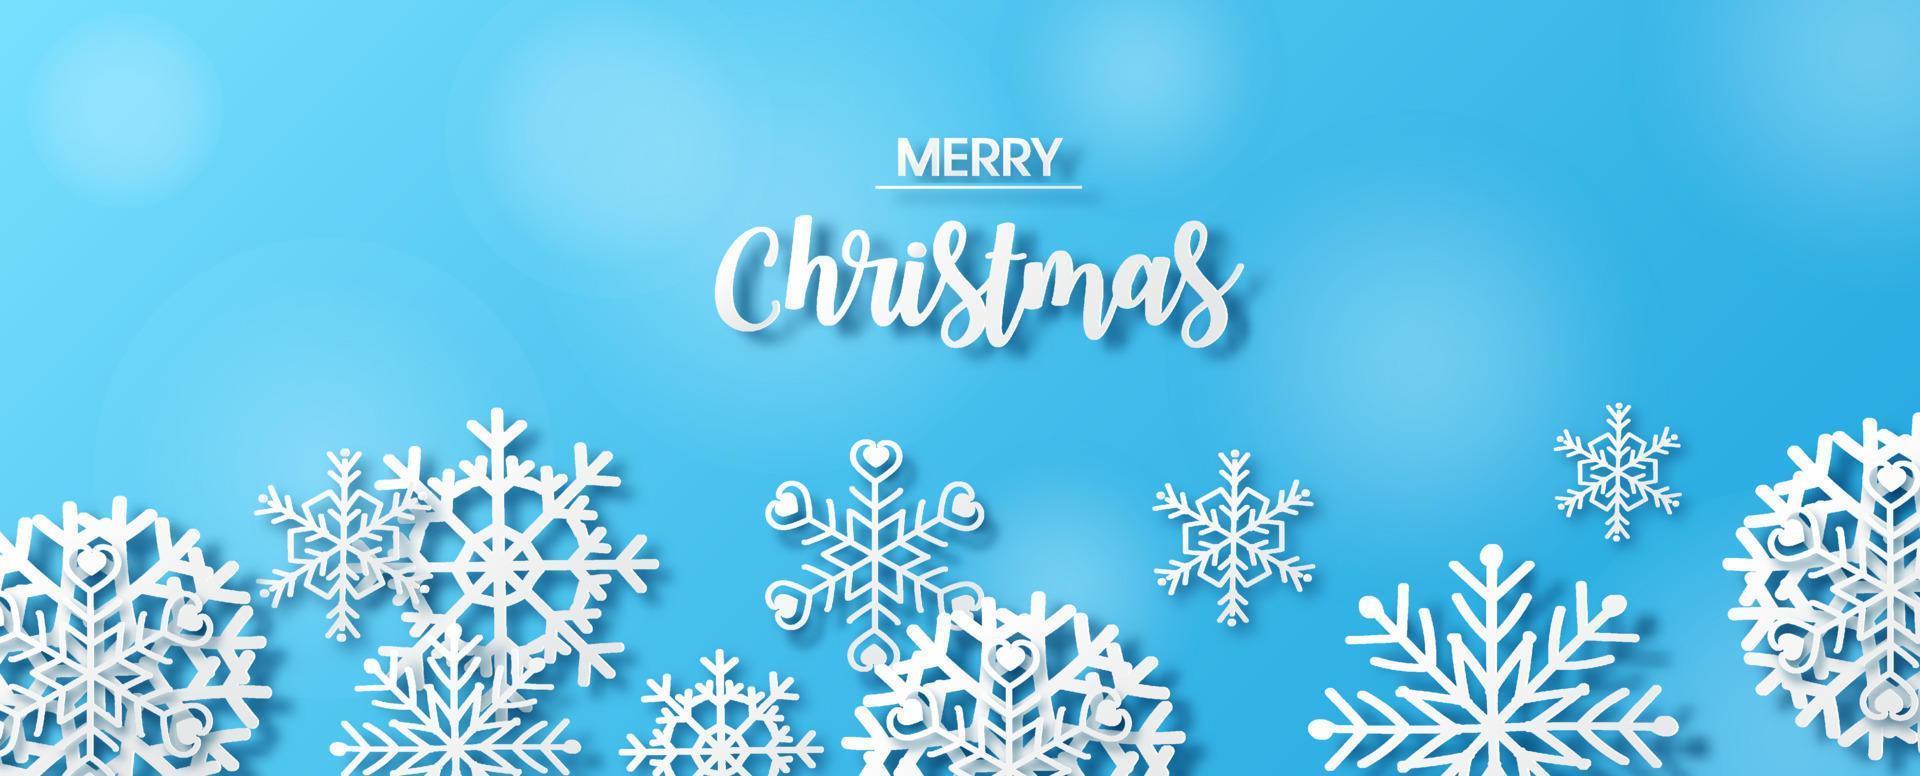 Closeup and crop variety snowflakes in paper cut style with MERRY CHRISTMAS texts on blurred and blue background. Christmas greeting card in vector and web banner design.